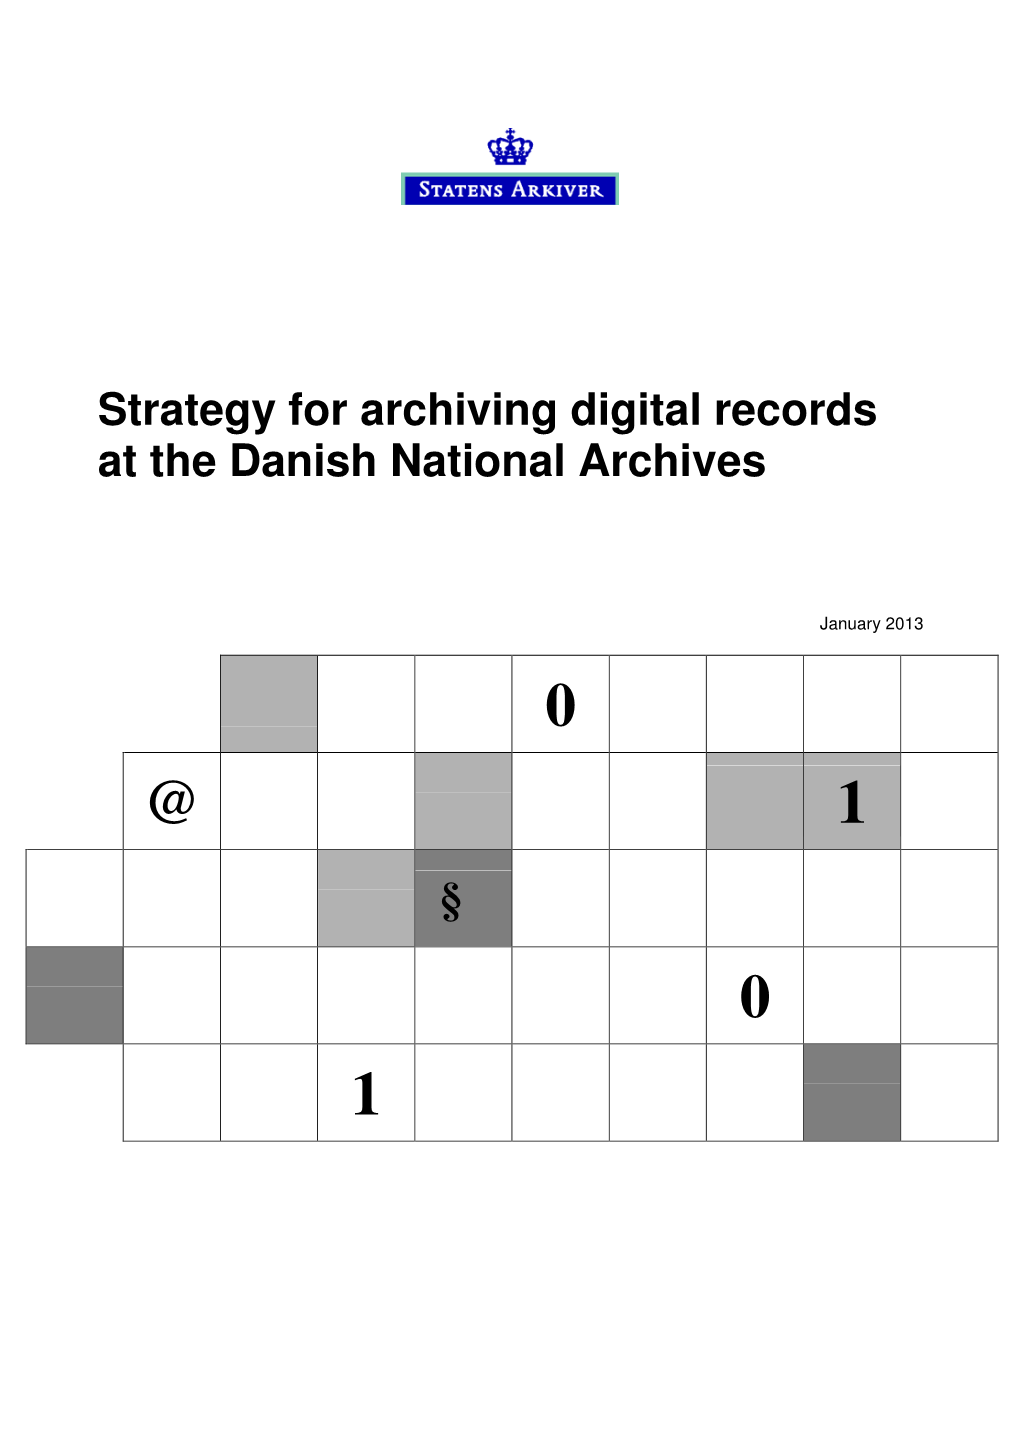 Strategy for Archiving Digital Records at the Danish National Archives